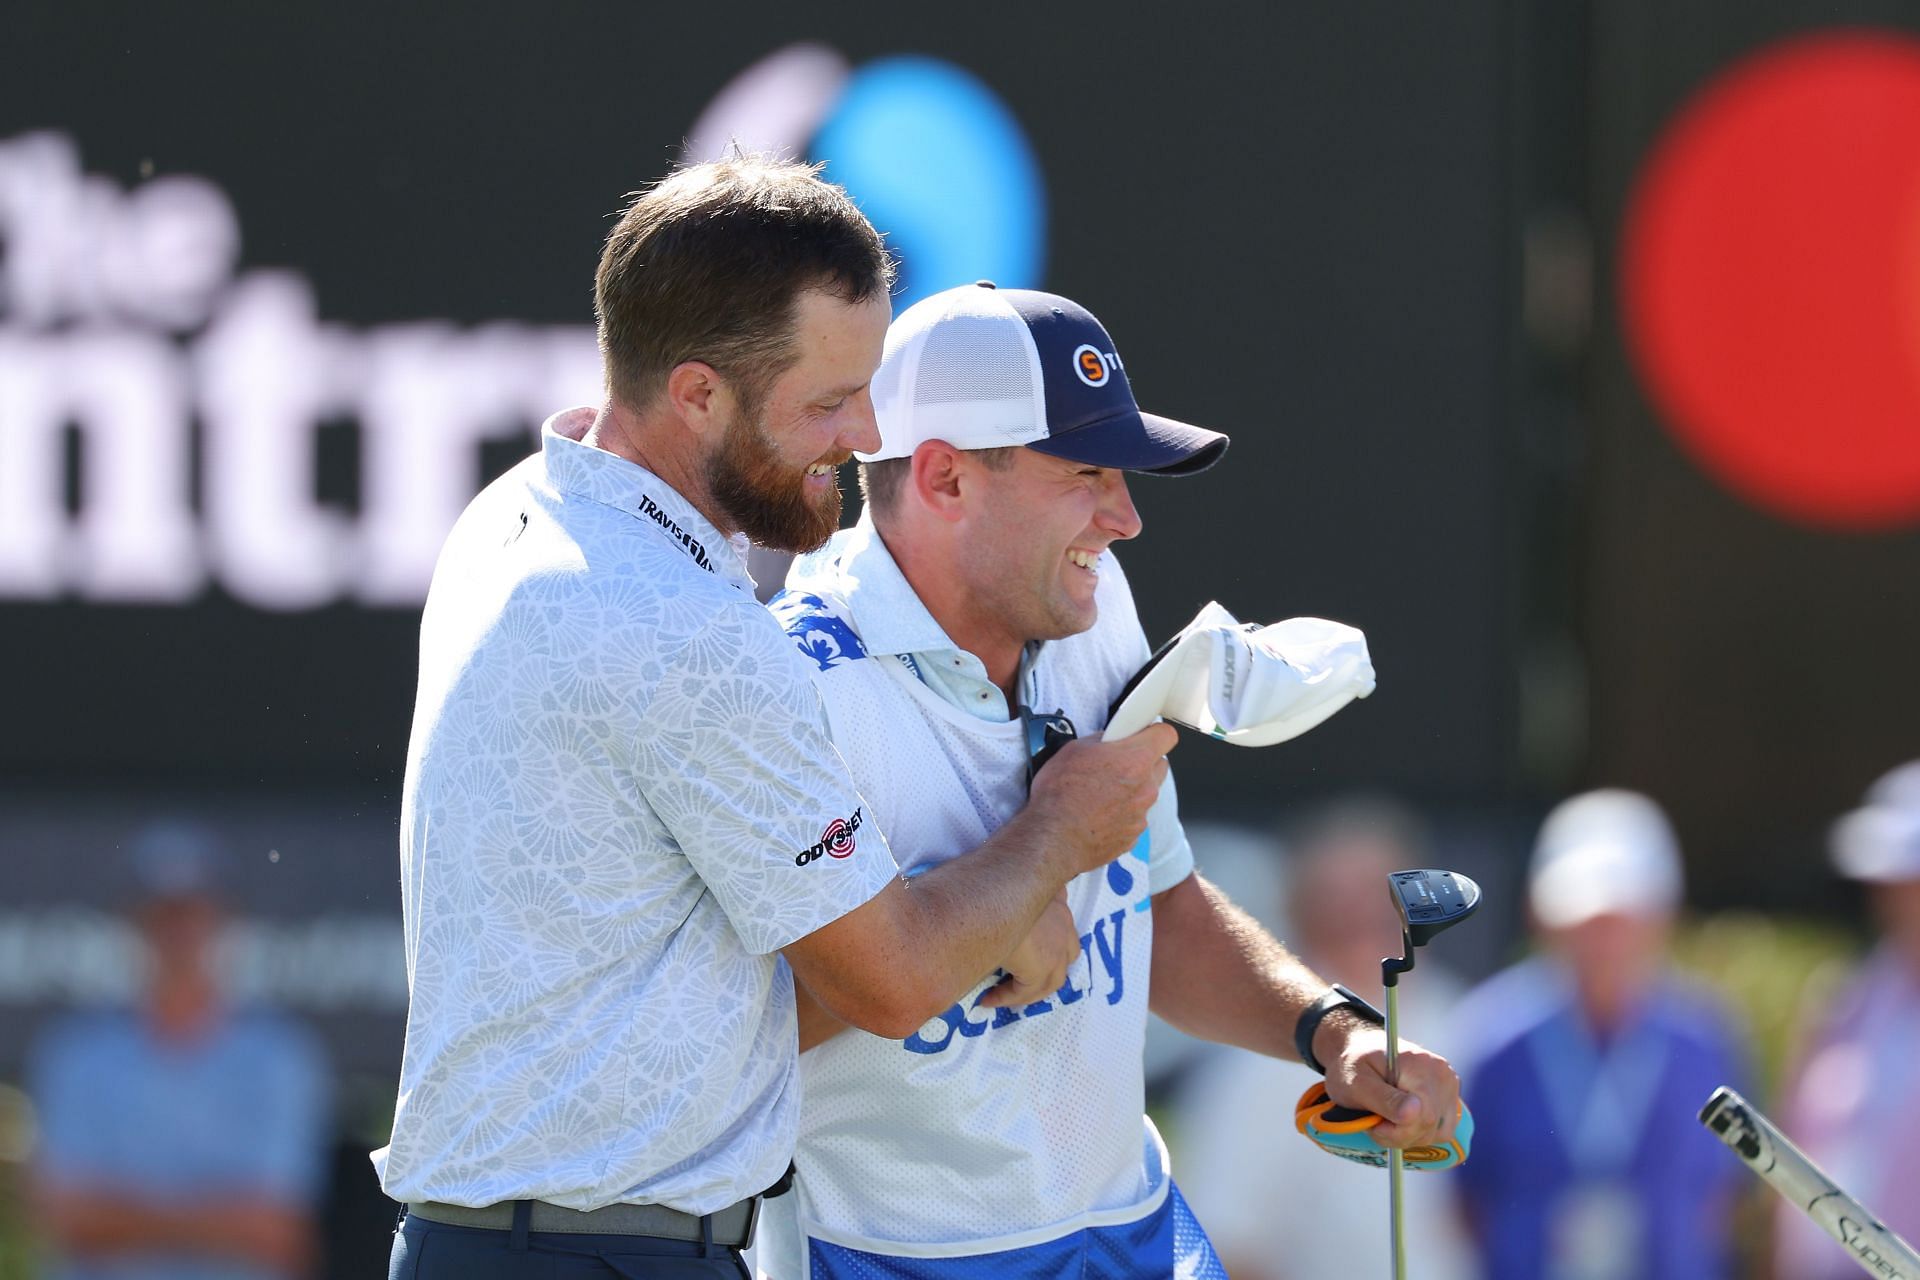 Chris Kirk (L) celebrates with caddie Michael Cromie (R) after winning the Sentry